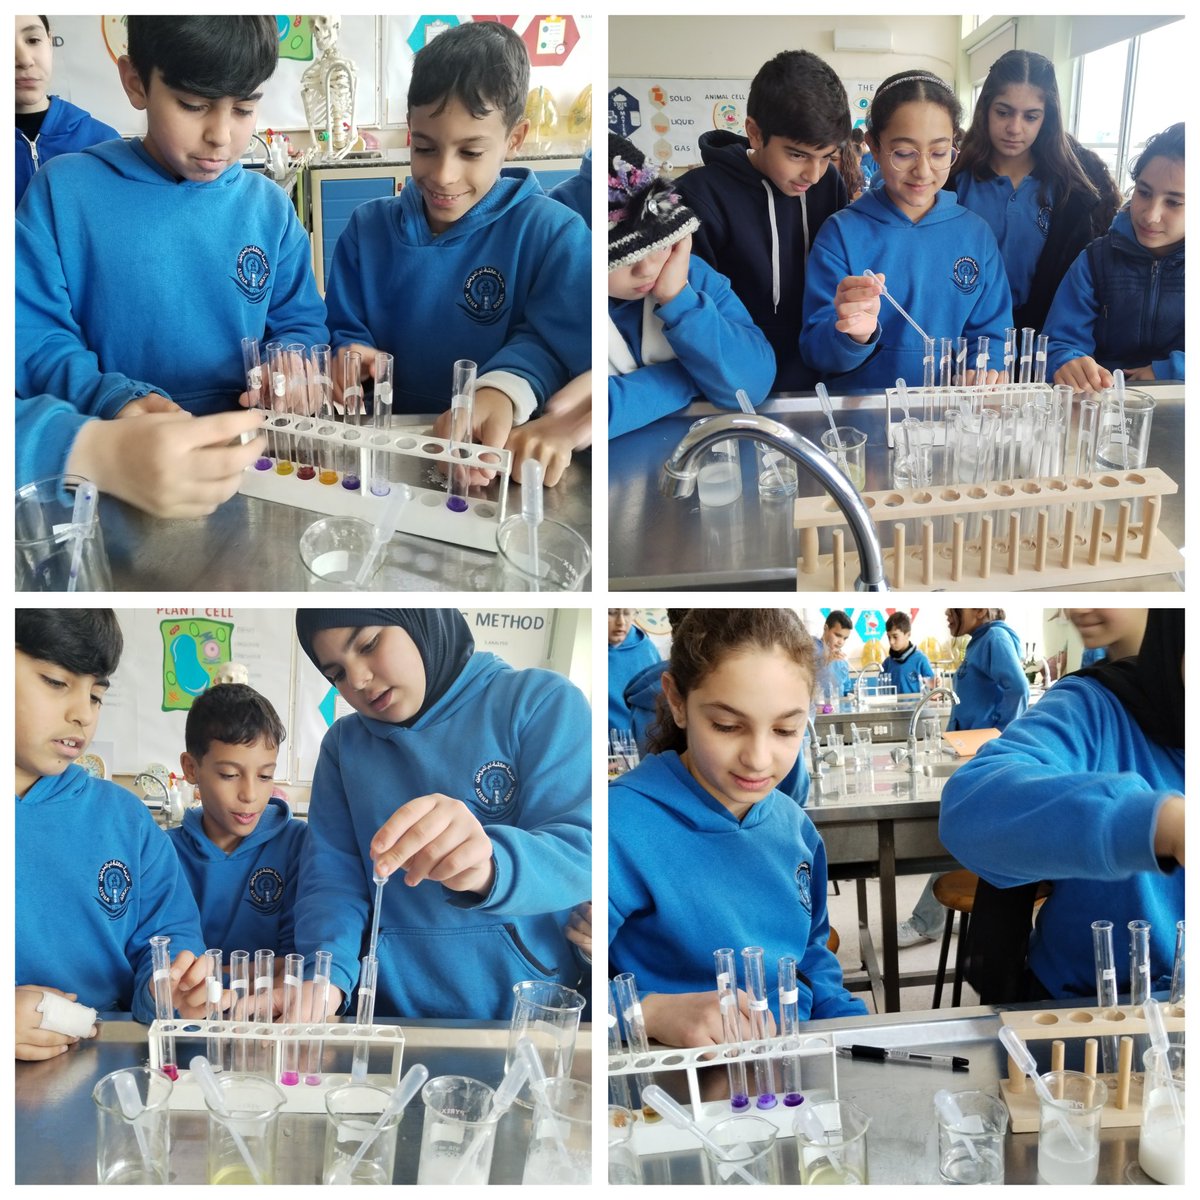 Through chemical reactions, scientists can bring their imaginative concepts to life, creating new materials and exploring different products. #chemicalReactions @NElakhdar @MakAishaSchool